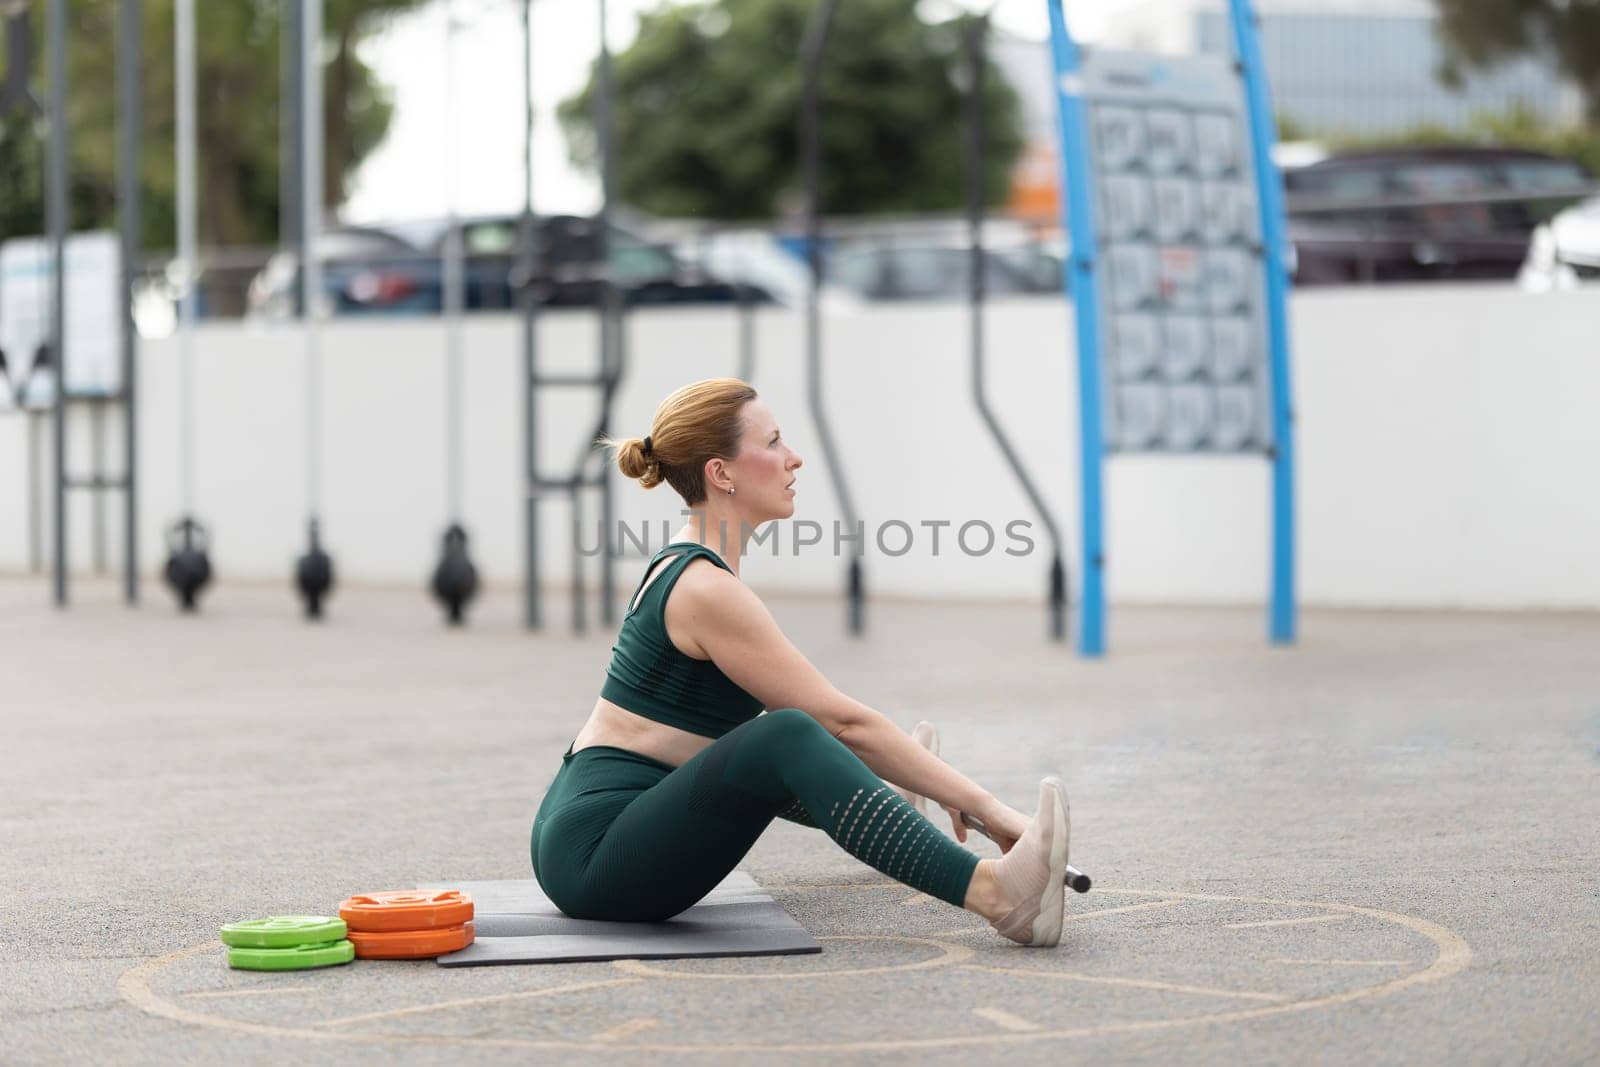 Adult athletic woman exercising with a barbell outdoors. Mid shot